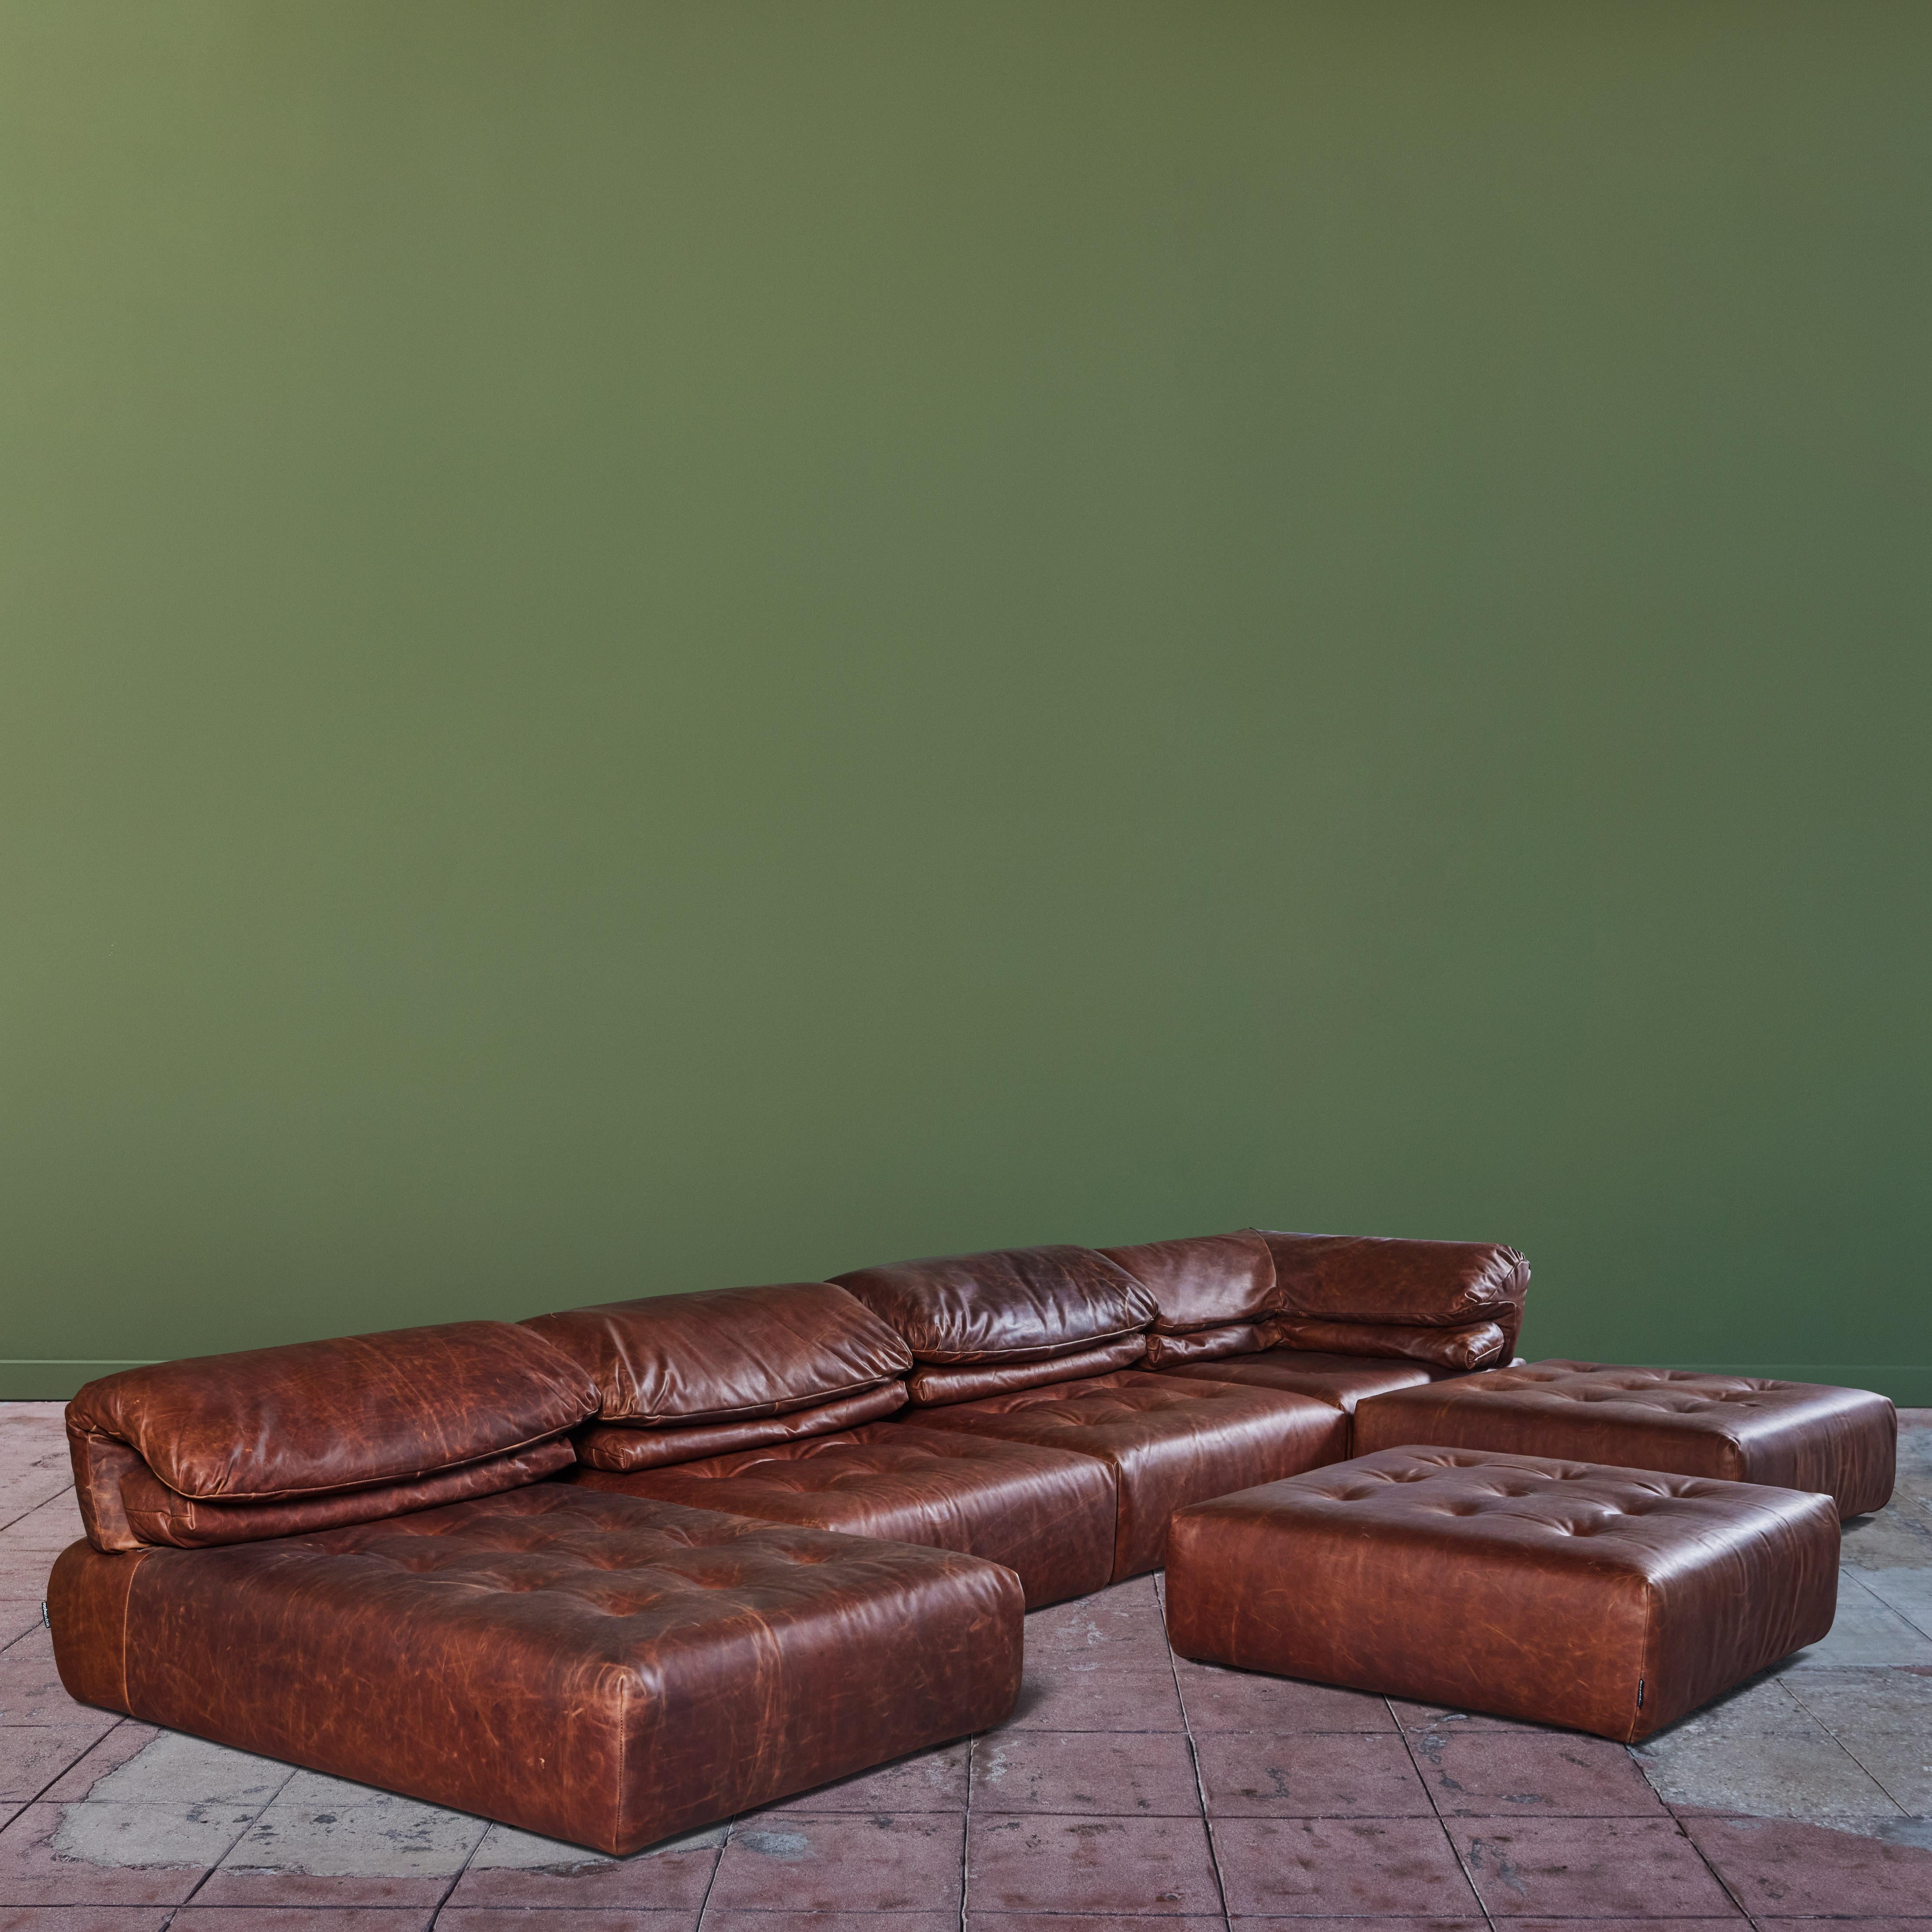 modular leather couch